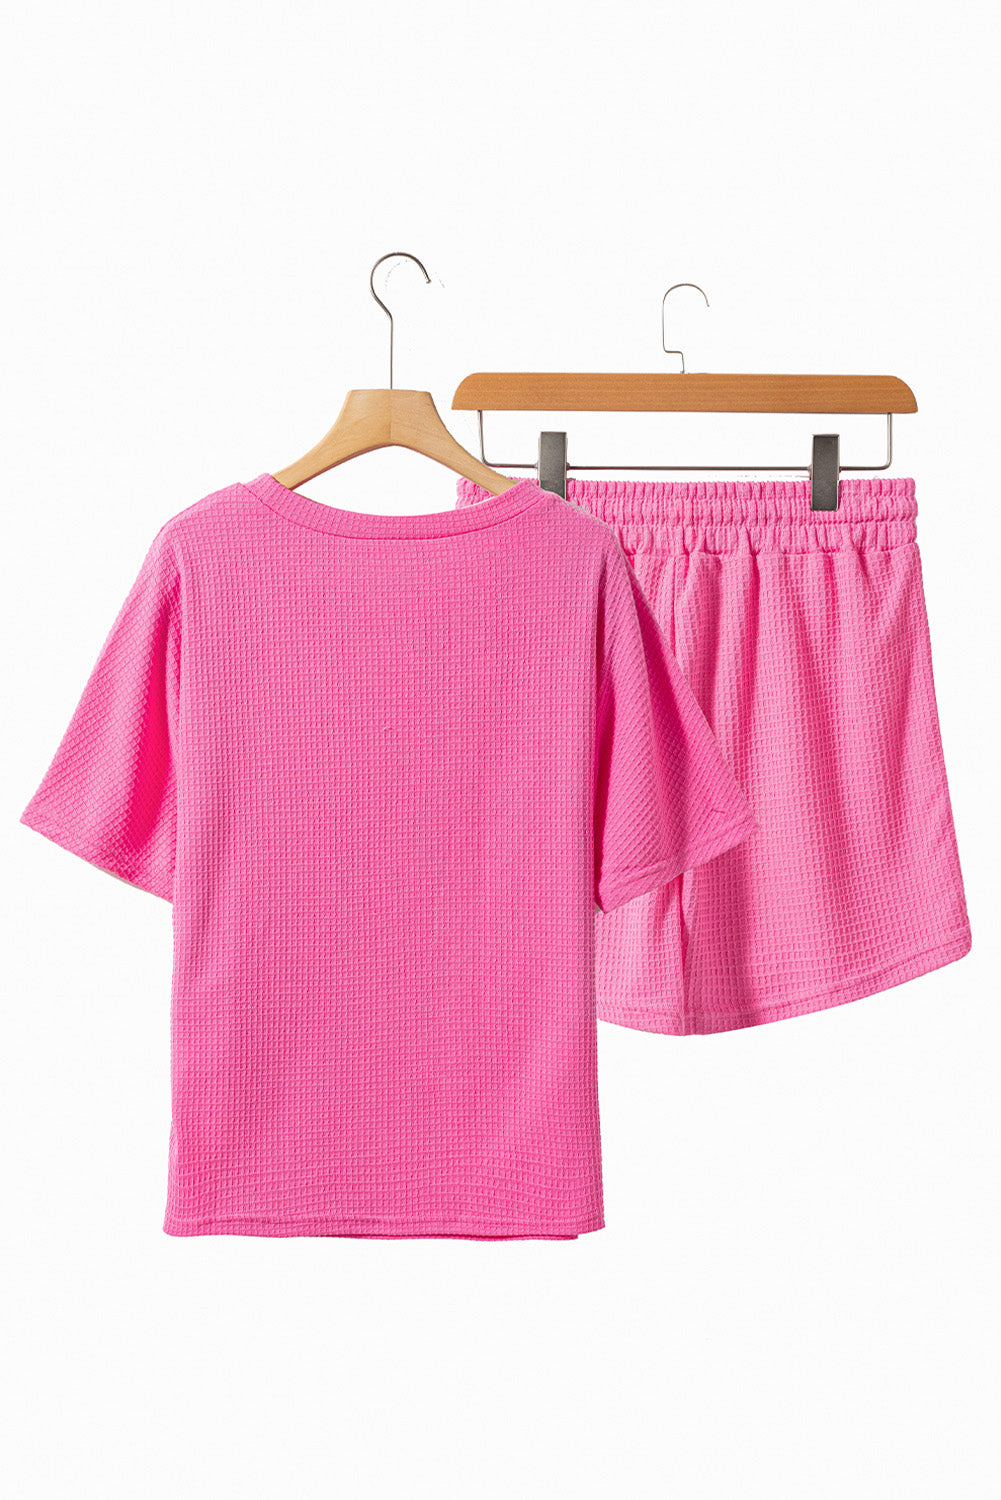 Waffle-Knit Round Neck Top and Shorts Set